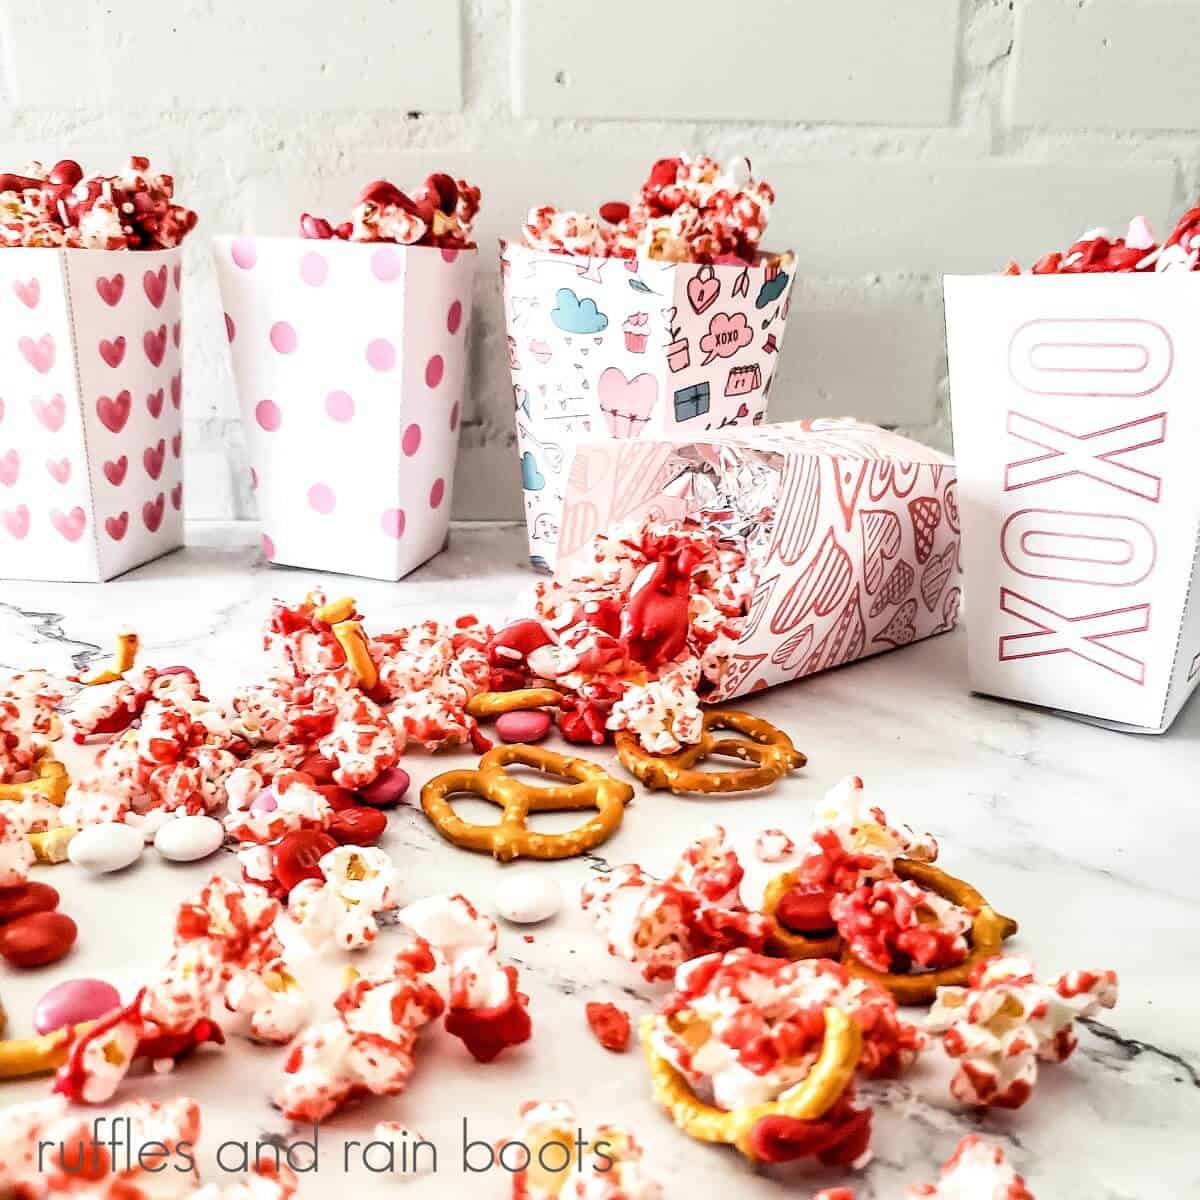 Close up shot of 5 white vertical boxes, one laying down, printed with various Valentine's patterns, filled with popcorn mix with some of the mix scattered on a marble surface.